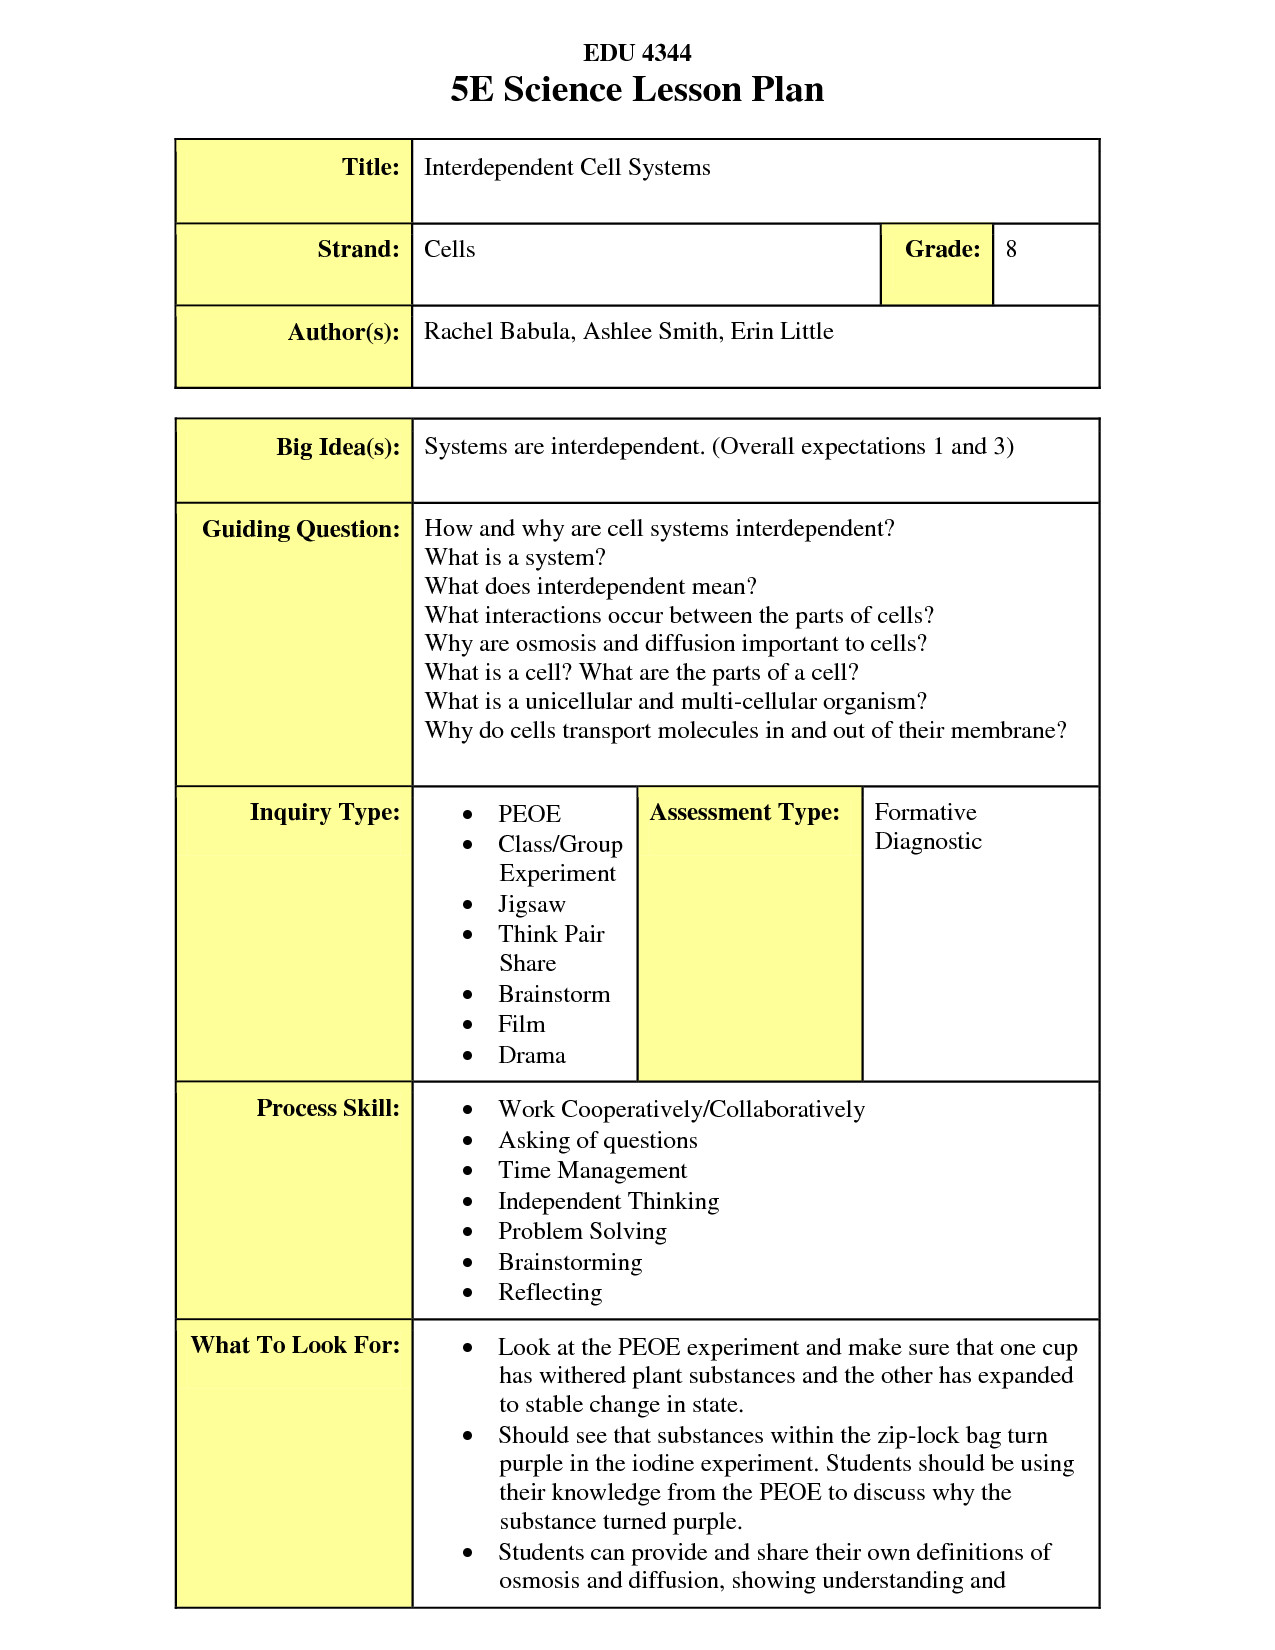 5e Model Lesson Plan the 5e Lesson Plan is An Extremely Useful Way Of Planning